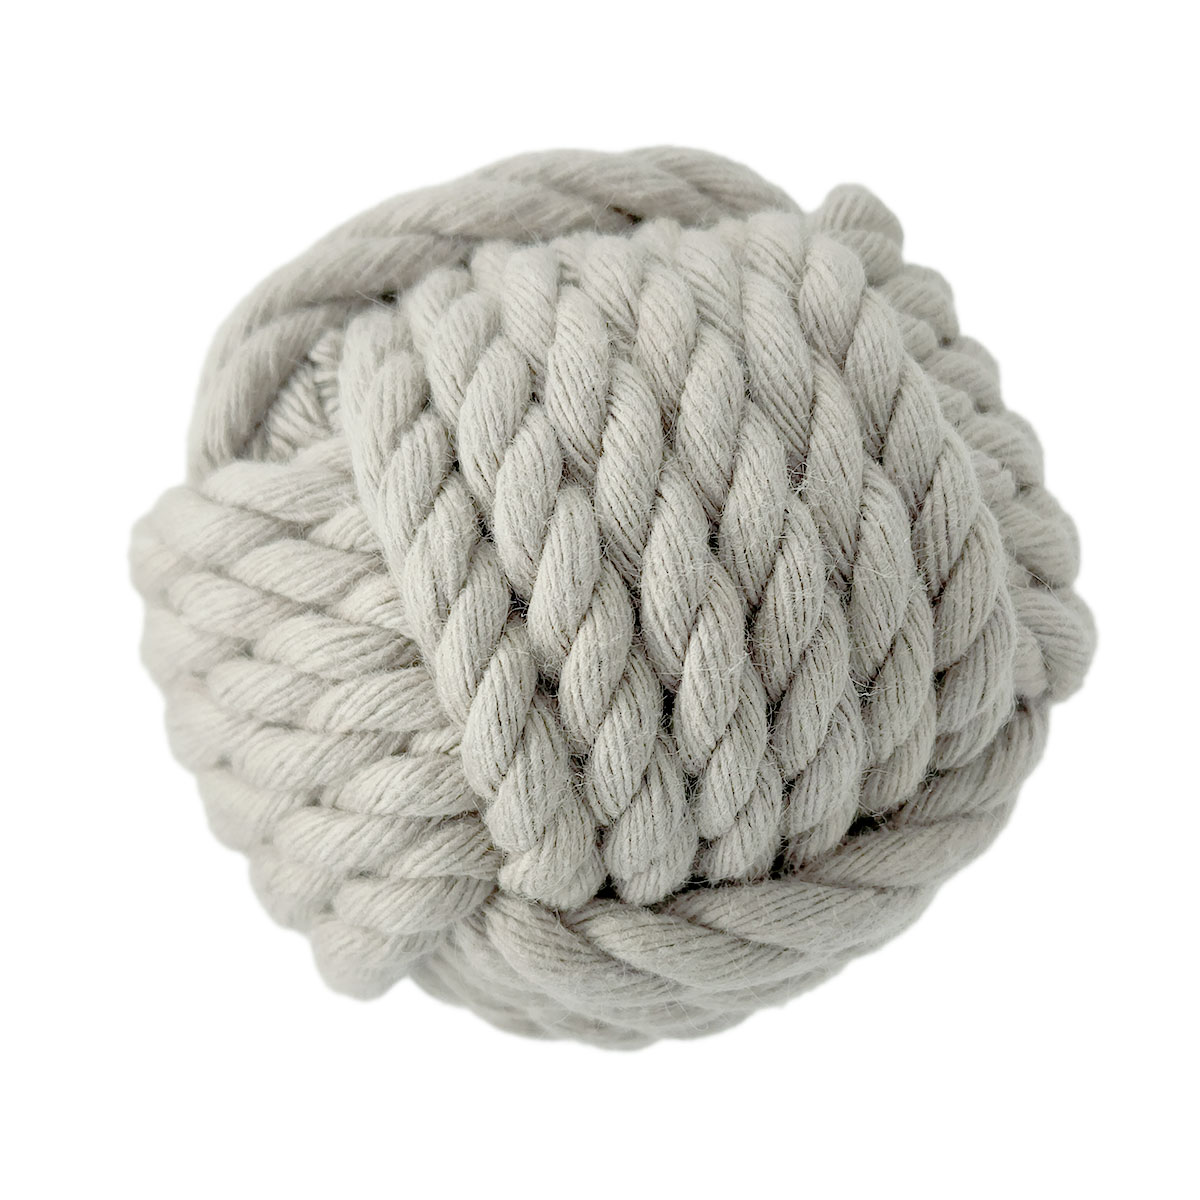 Snow White Cotton Twisted Rope - 10 mm